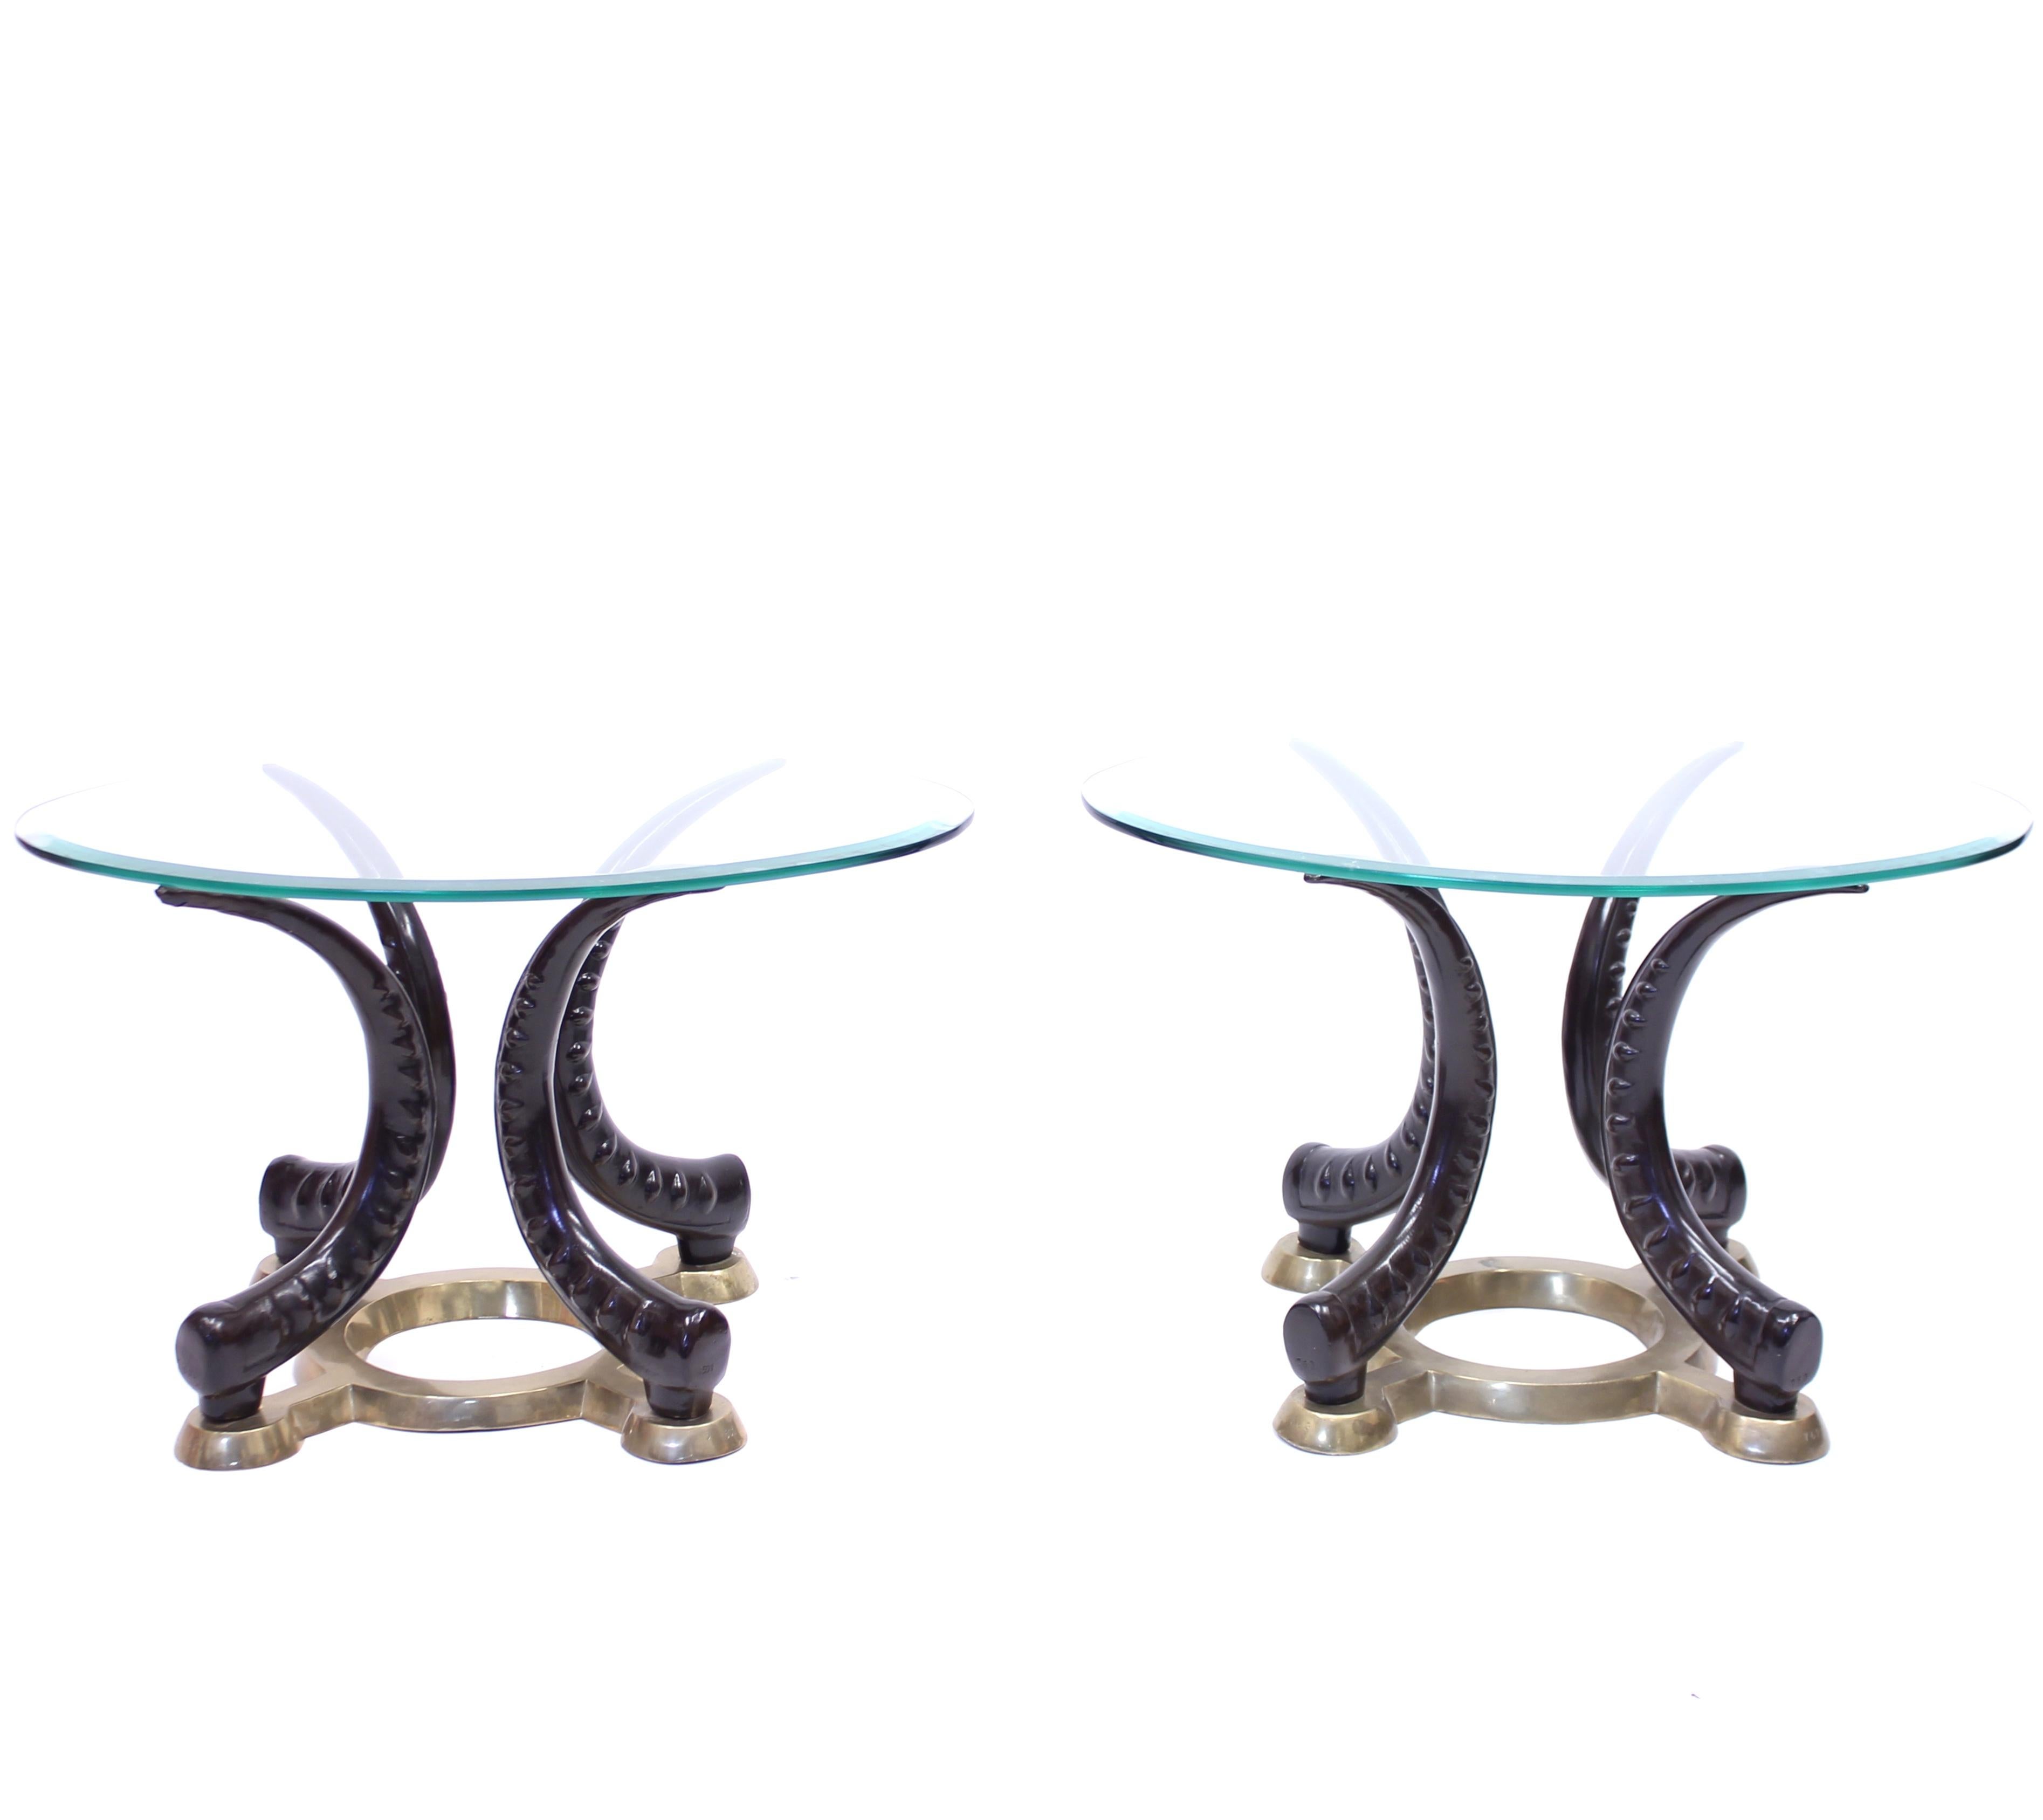 Hollywood Regency Pair of Vintage Brass and Faux Tusks Side or Coffee Tables, Ca 1970s For Sale